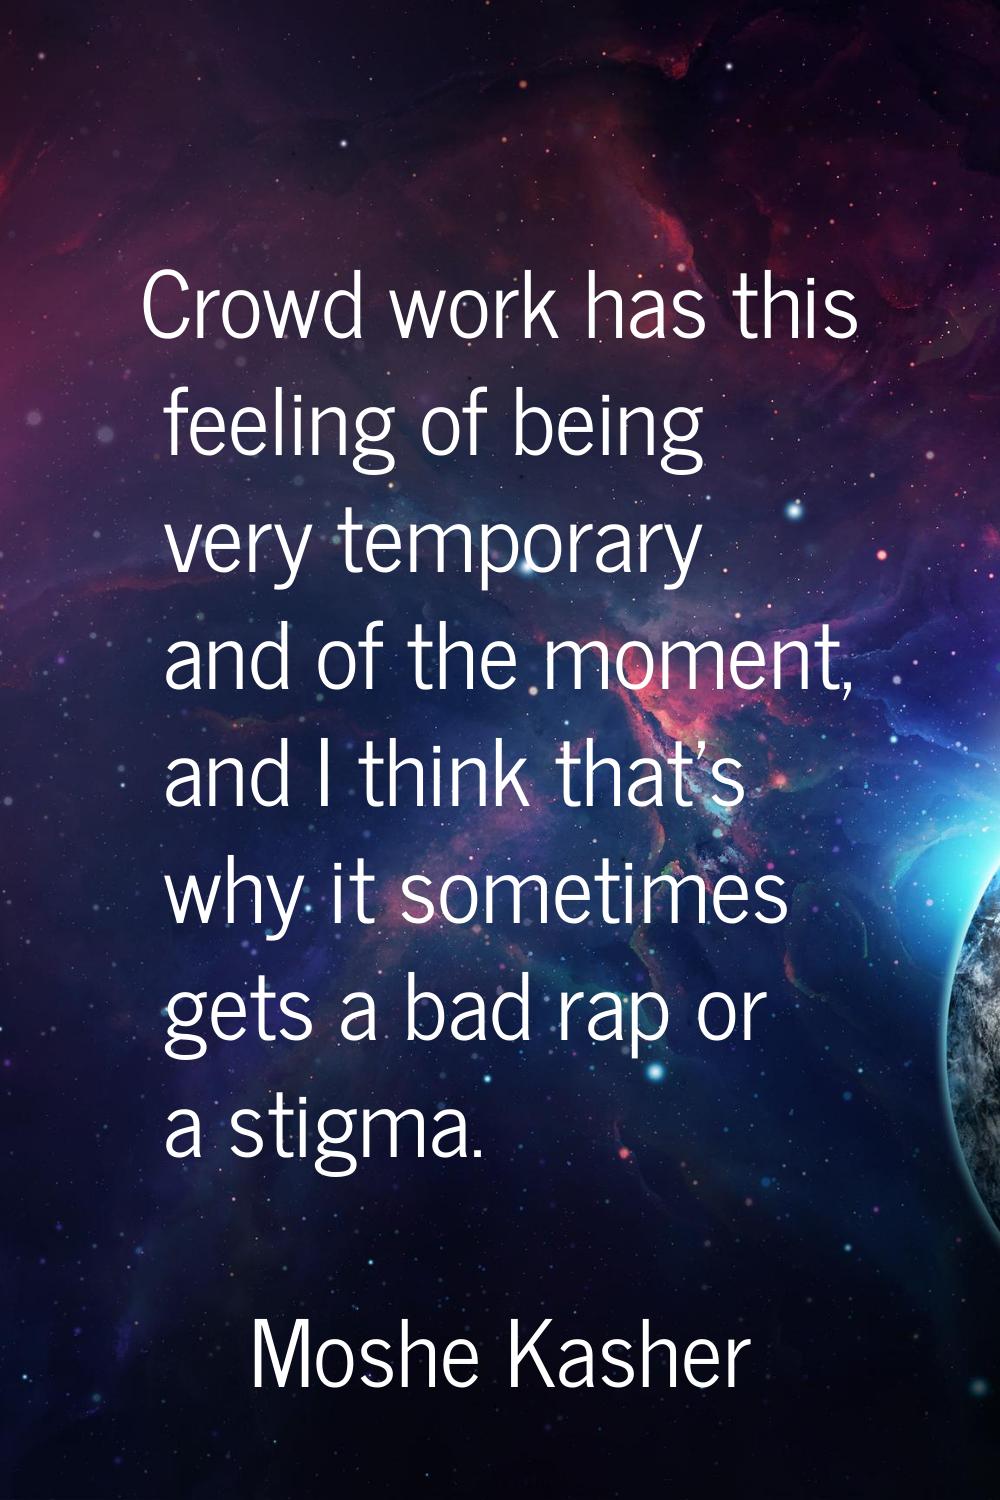 Crowd work has this feeling of being very temporary and of the moment, and I think that's why it so